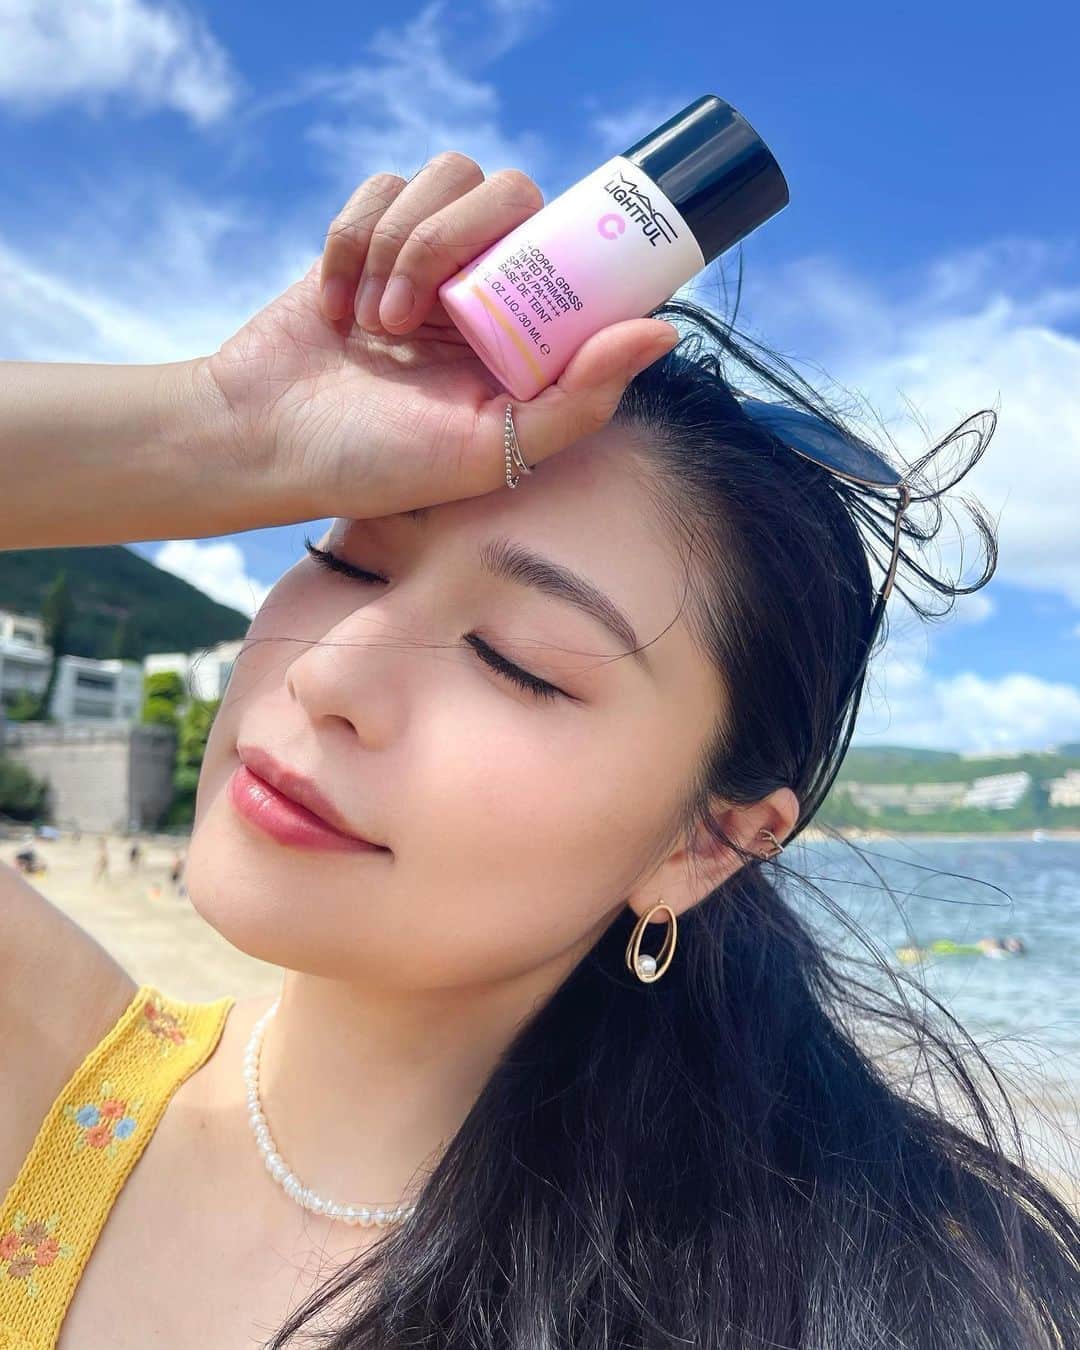 M·A·C Cosmetics Hong Kongさんのインスタグラム写真 - (M·A·C Cosmetics Hong KongInstagram)「☀️夏日想出海pool party？首先你需要呢支法寶！ 夏日精選 #養膚美顏底霜 讓你毫無保留咁同陽光玩遊戲！  ✔️keep住補水唔怕曬乾肌膚 ✔️超高防曬系數 SPF45/PA++++，猛烈陽光都唔怕 ✔️即時提亮抗暗沉，同潾潾水光互相輝映 ✔️透出女神玫瑰光，偽素顏最啱！  💖100% 同意質地貼服透薄 💖96%同意肌膚即時水潤，上底妝時更柔滑貼服 💖96%同意能自然地提亮膚色，足夠基本防曬保護需要  立即入手，勢必成為眾人焦點！ *31位用家參與@cosme 2023年1月產品使用後滿意度調查之結果  Product featured: LIGHTFUL C+ Coral Grass Tinted Primer C+光透養膚防曬底霜 - HK$390 #UV美顏底霜  #MACLIGHTFULC  #MACHongKong #Regram from @sofayemac_  Play under sun with our iconic radiance-booster primer💡💖 The iconic Lightful C+ Coral Grass Tinted Primer brightens your dull skin, leaving a natural rosy gleam that brings out your inner glow✨  Formulated with hydration formula and broad spectrum of sun protection, your skin is infused with an ultra-boost of hydration, shielded from UV rays and toned up right away!  💖100% agree it is lightweight and breathable 💖96% agree it hydrates skin instantly, creating a perfect canvas for foundation 💖96% agree it brightens skin tone with adequate sun protection *Results from 31 users, tested on @cosme January 2023 product survey」8月9日 13時39分 - maccosmeticshk